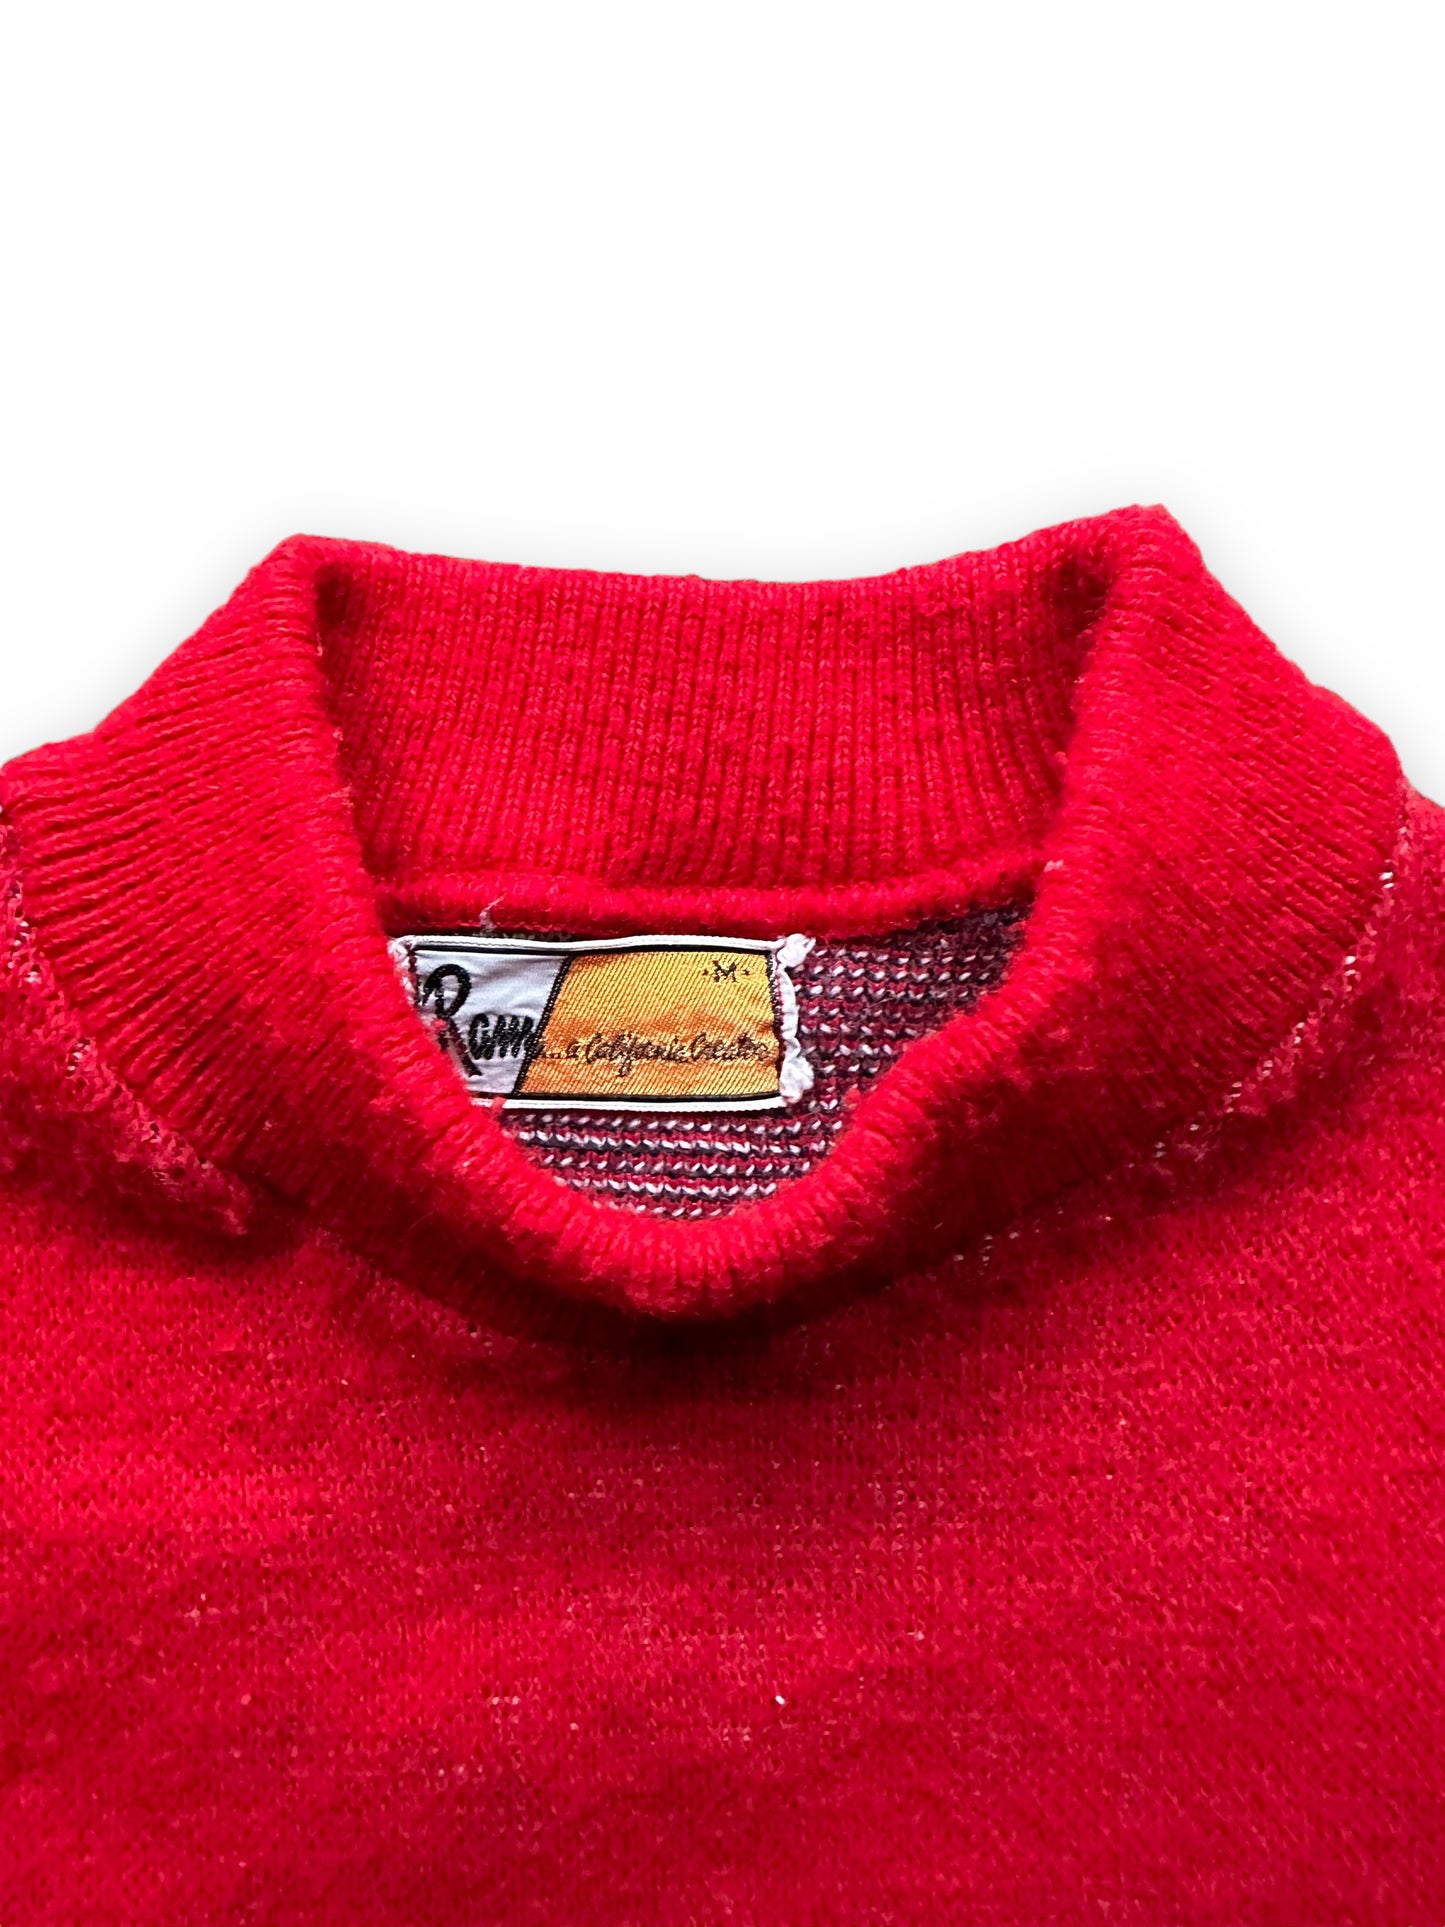 Tag View of Vintage Capitol Records Promotional Sweater SZ M |  Vintage Sweaters Seattle | Barn Owl Vintage Seattle